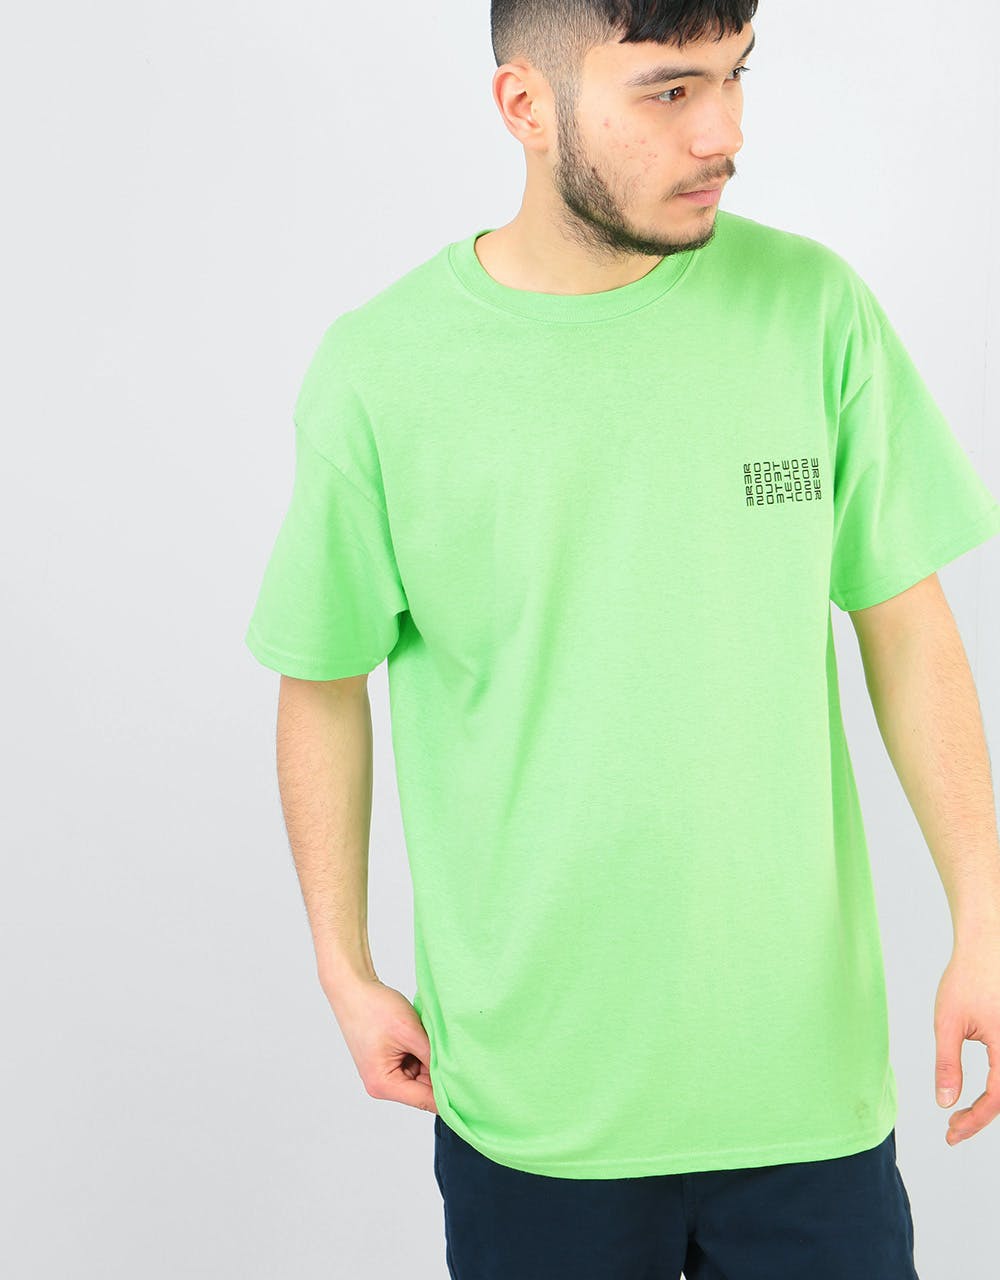 Route One Android T-Shirt - Lime